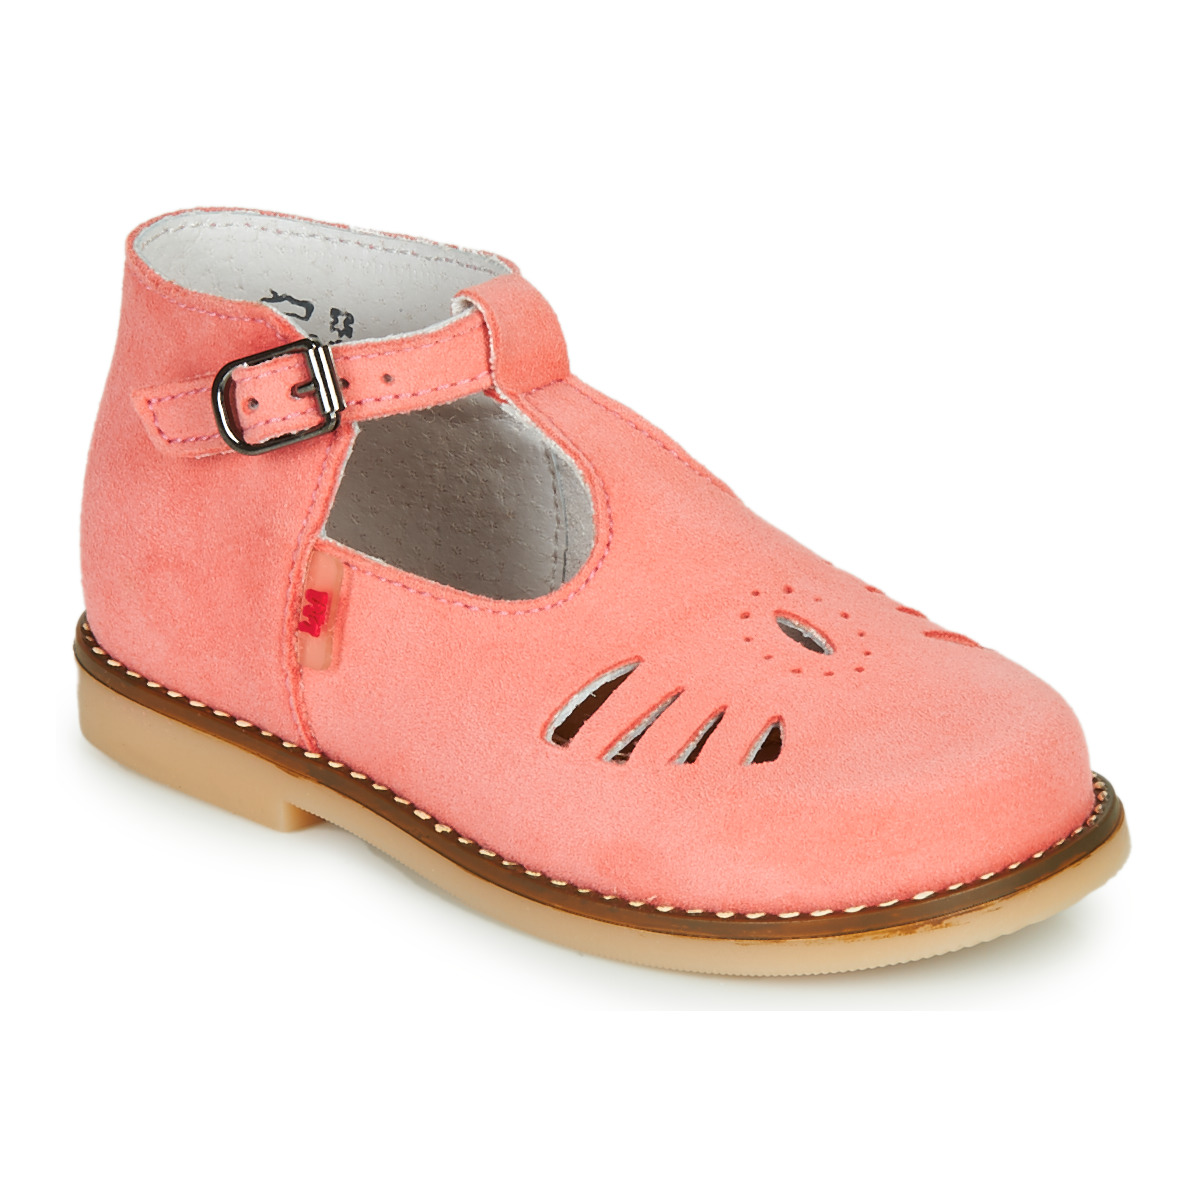 Shoes Girl Sandals Little Mary SURPRISE Pink